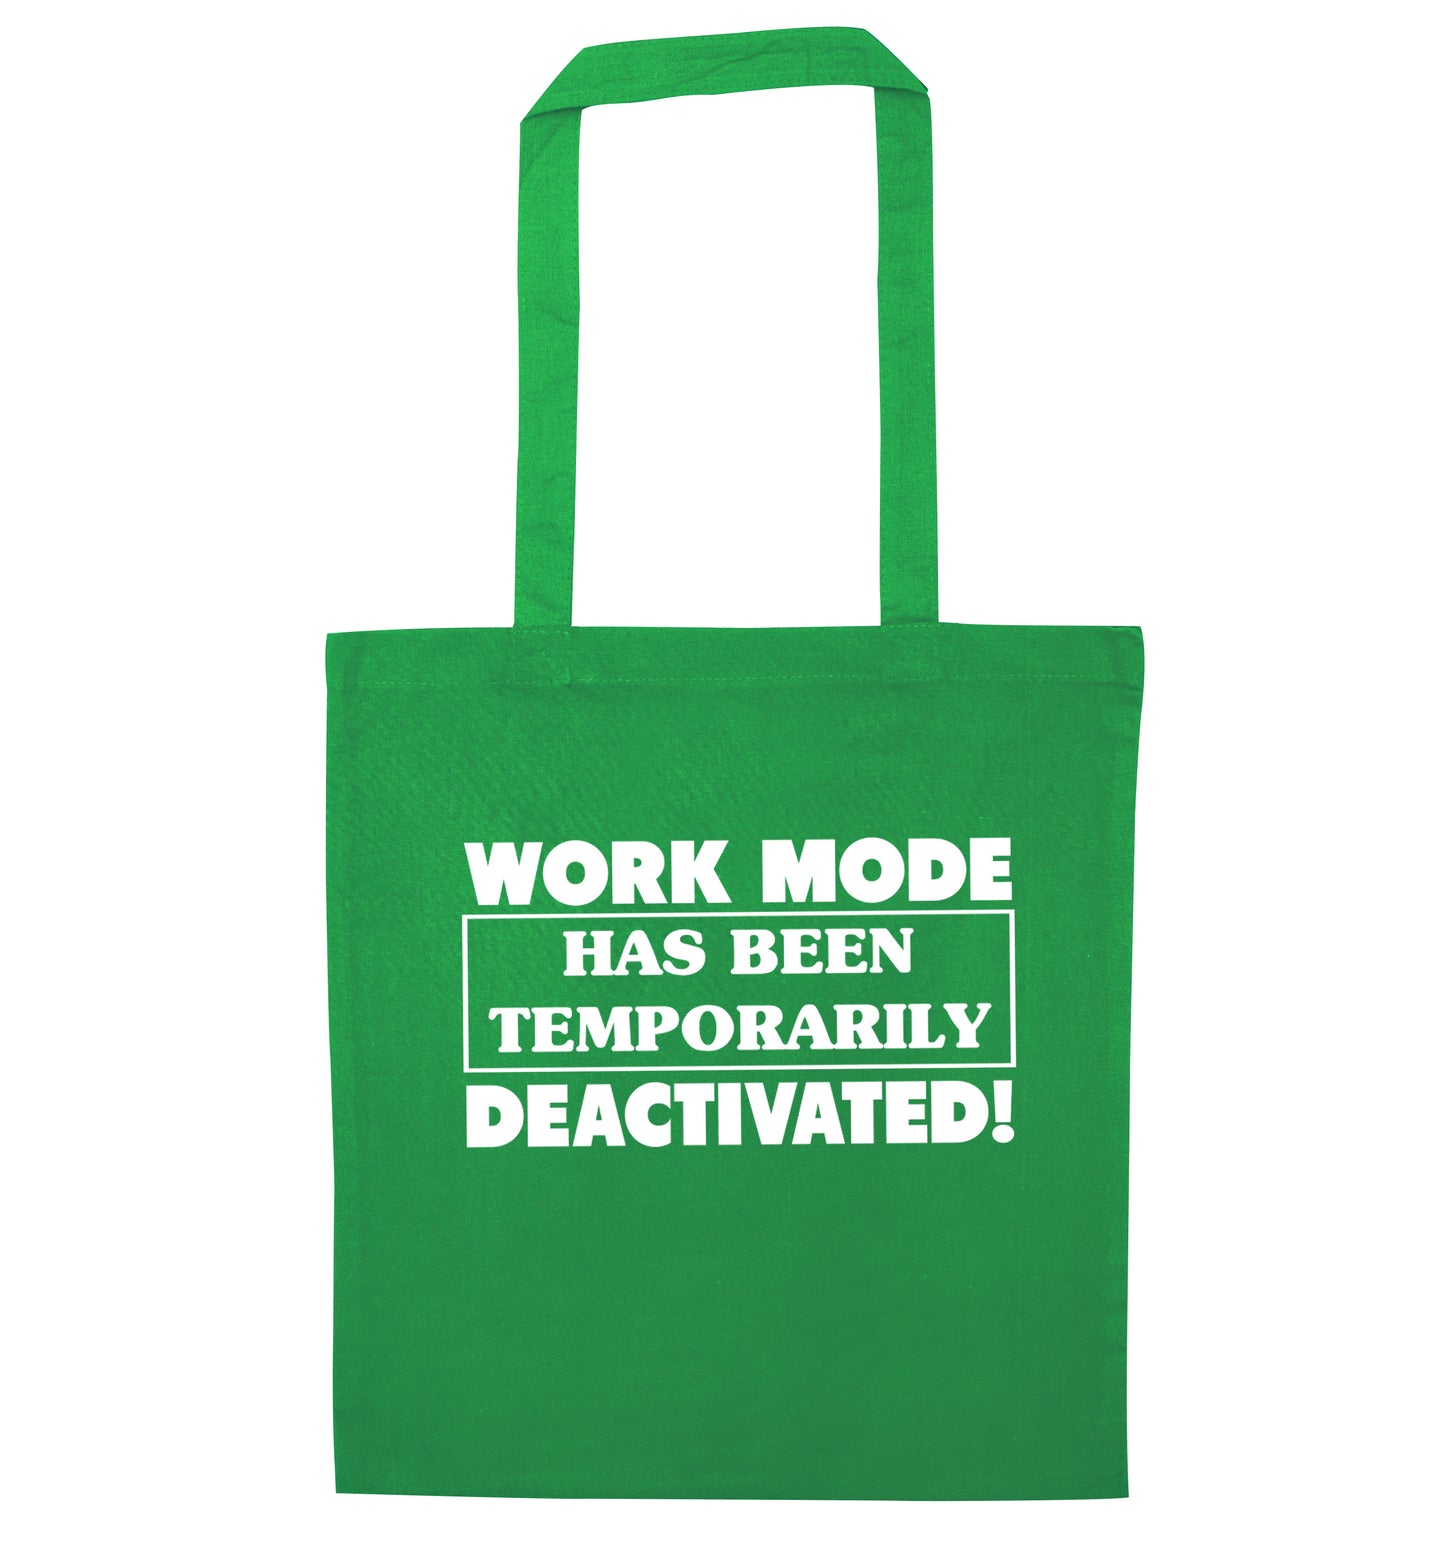 Work mode has now been temporarily deactivated green tote bag